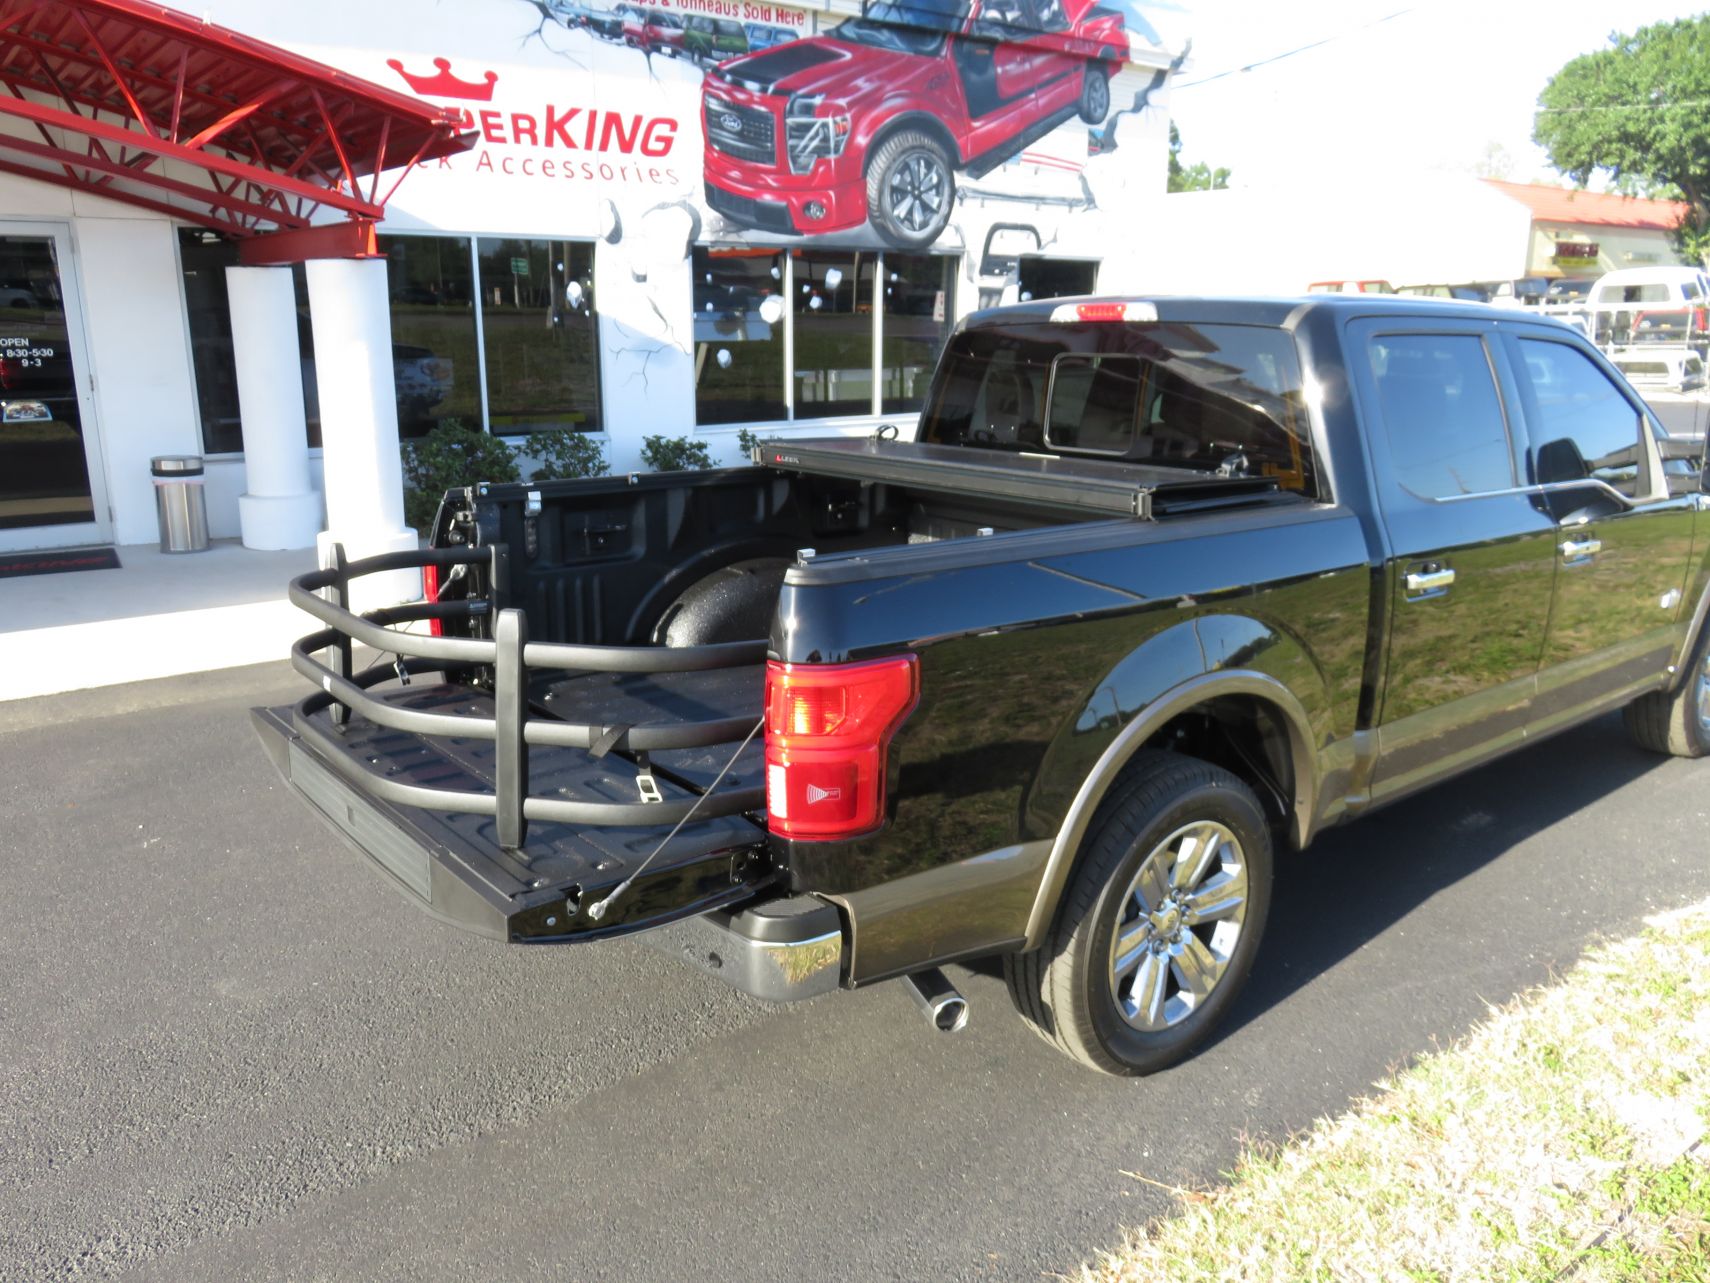 2018 Ford F150 with LEER 350M/TrilogyX2T, Hitch, BedXTender HD Sport by TopperKING in Brandon, FL 813-689-2449 or Clearwater, FL 727-530-9066. Call today!